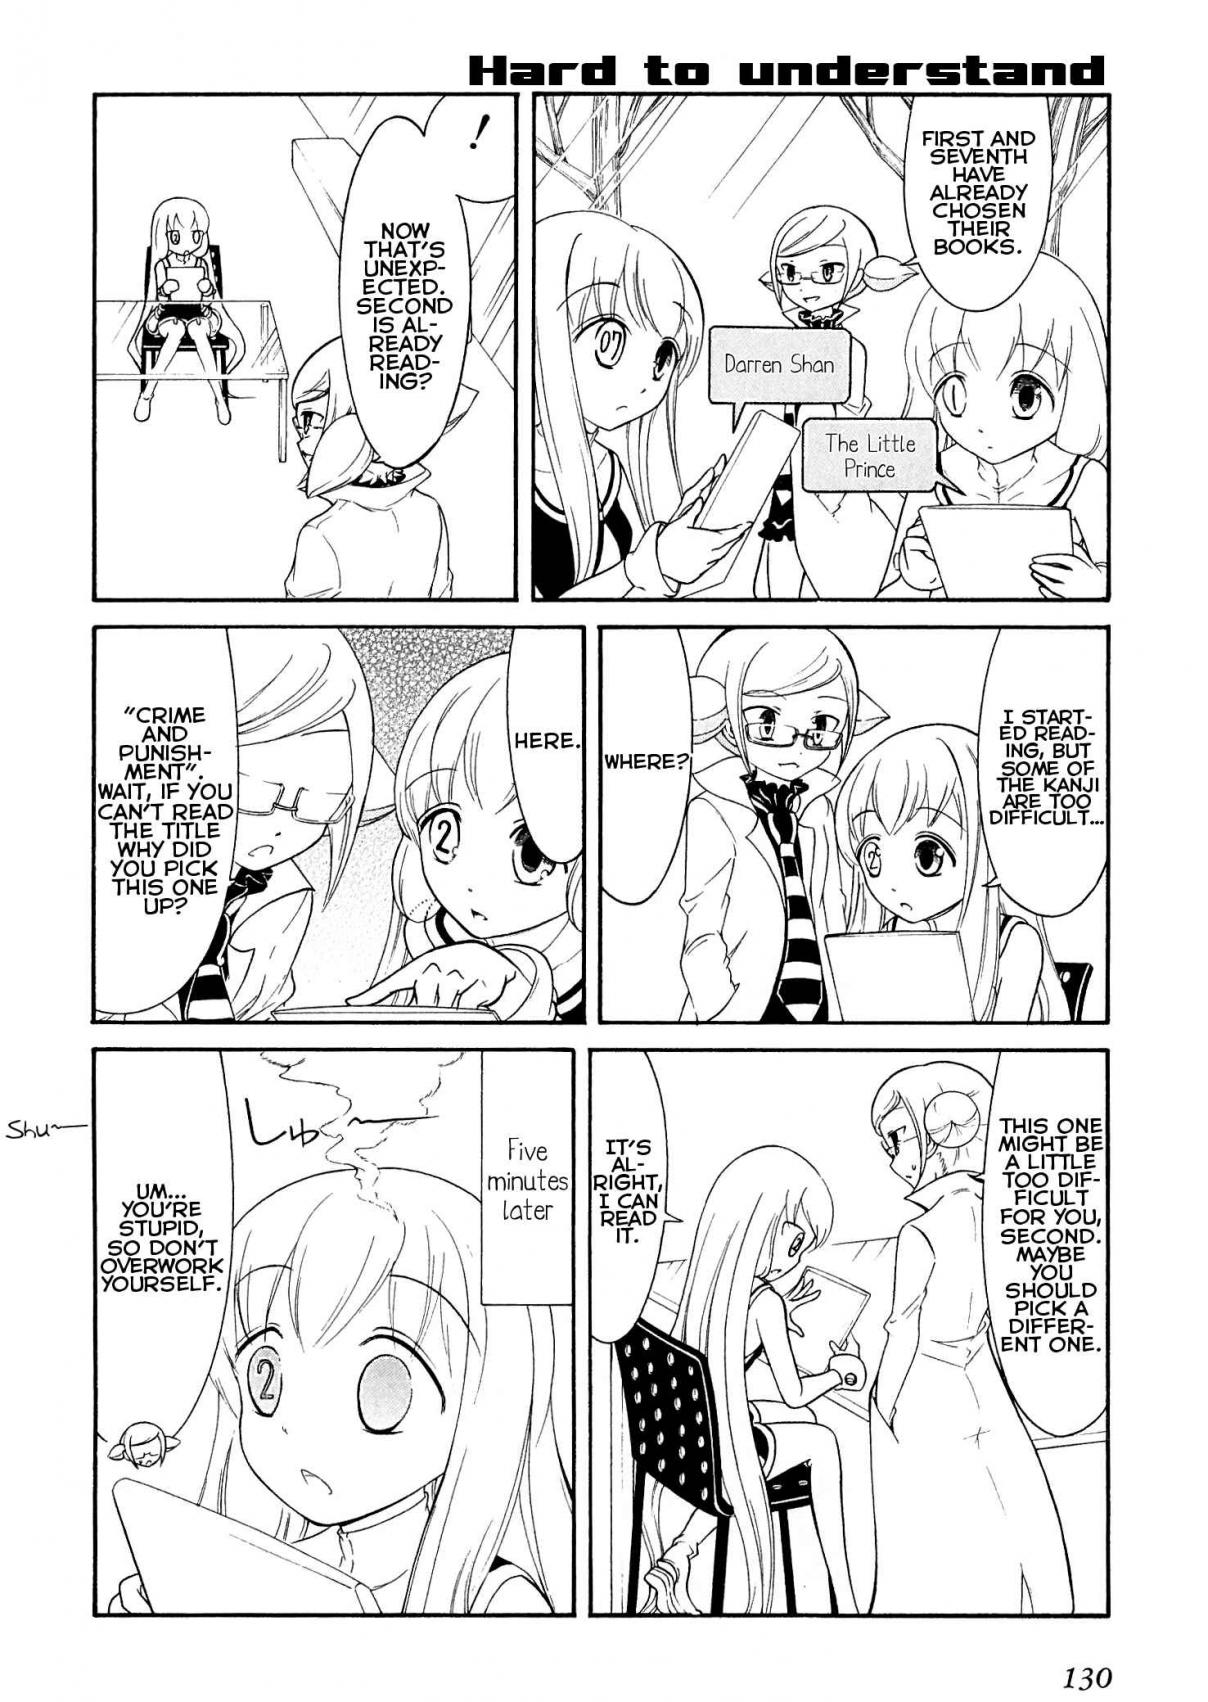 Number Girl Vol. 2 Ch. 34